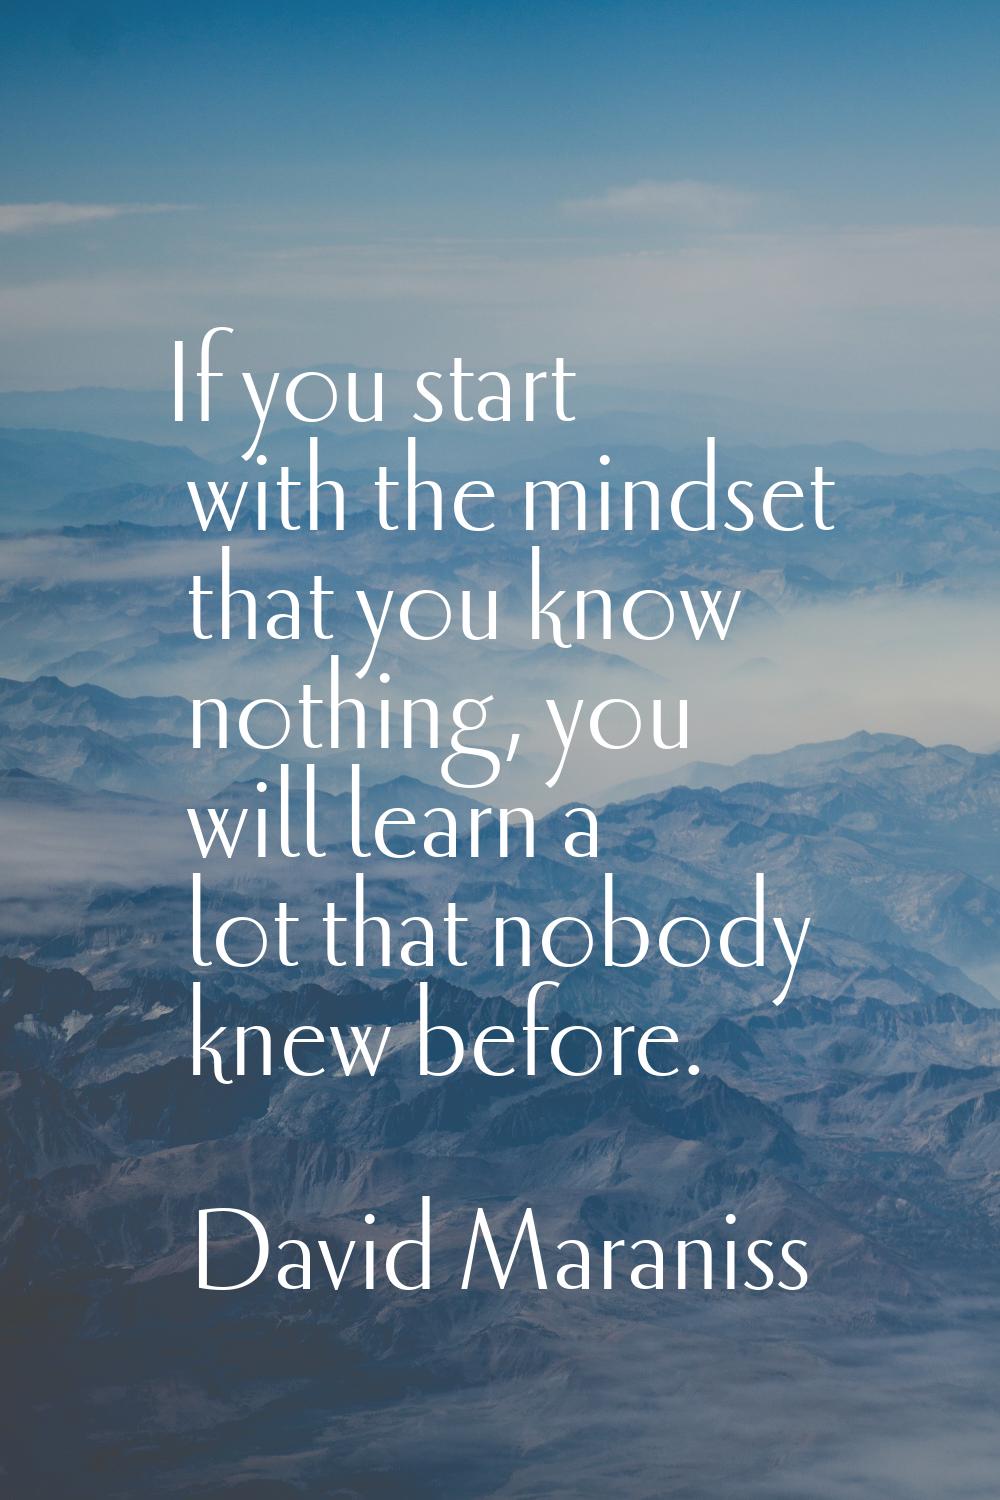 If you start with the mindset that you know nothing, you will learn a lot that nobody knew before.